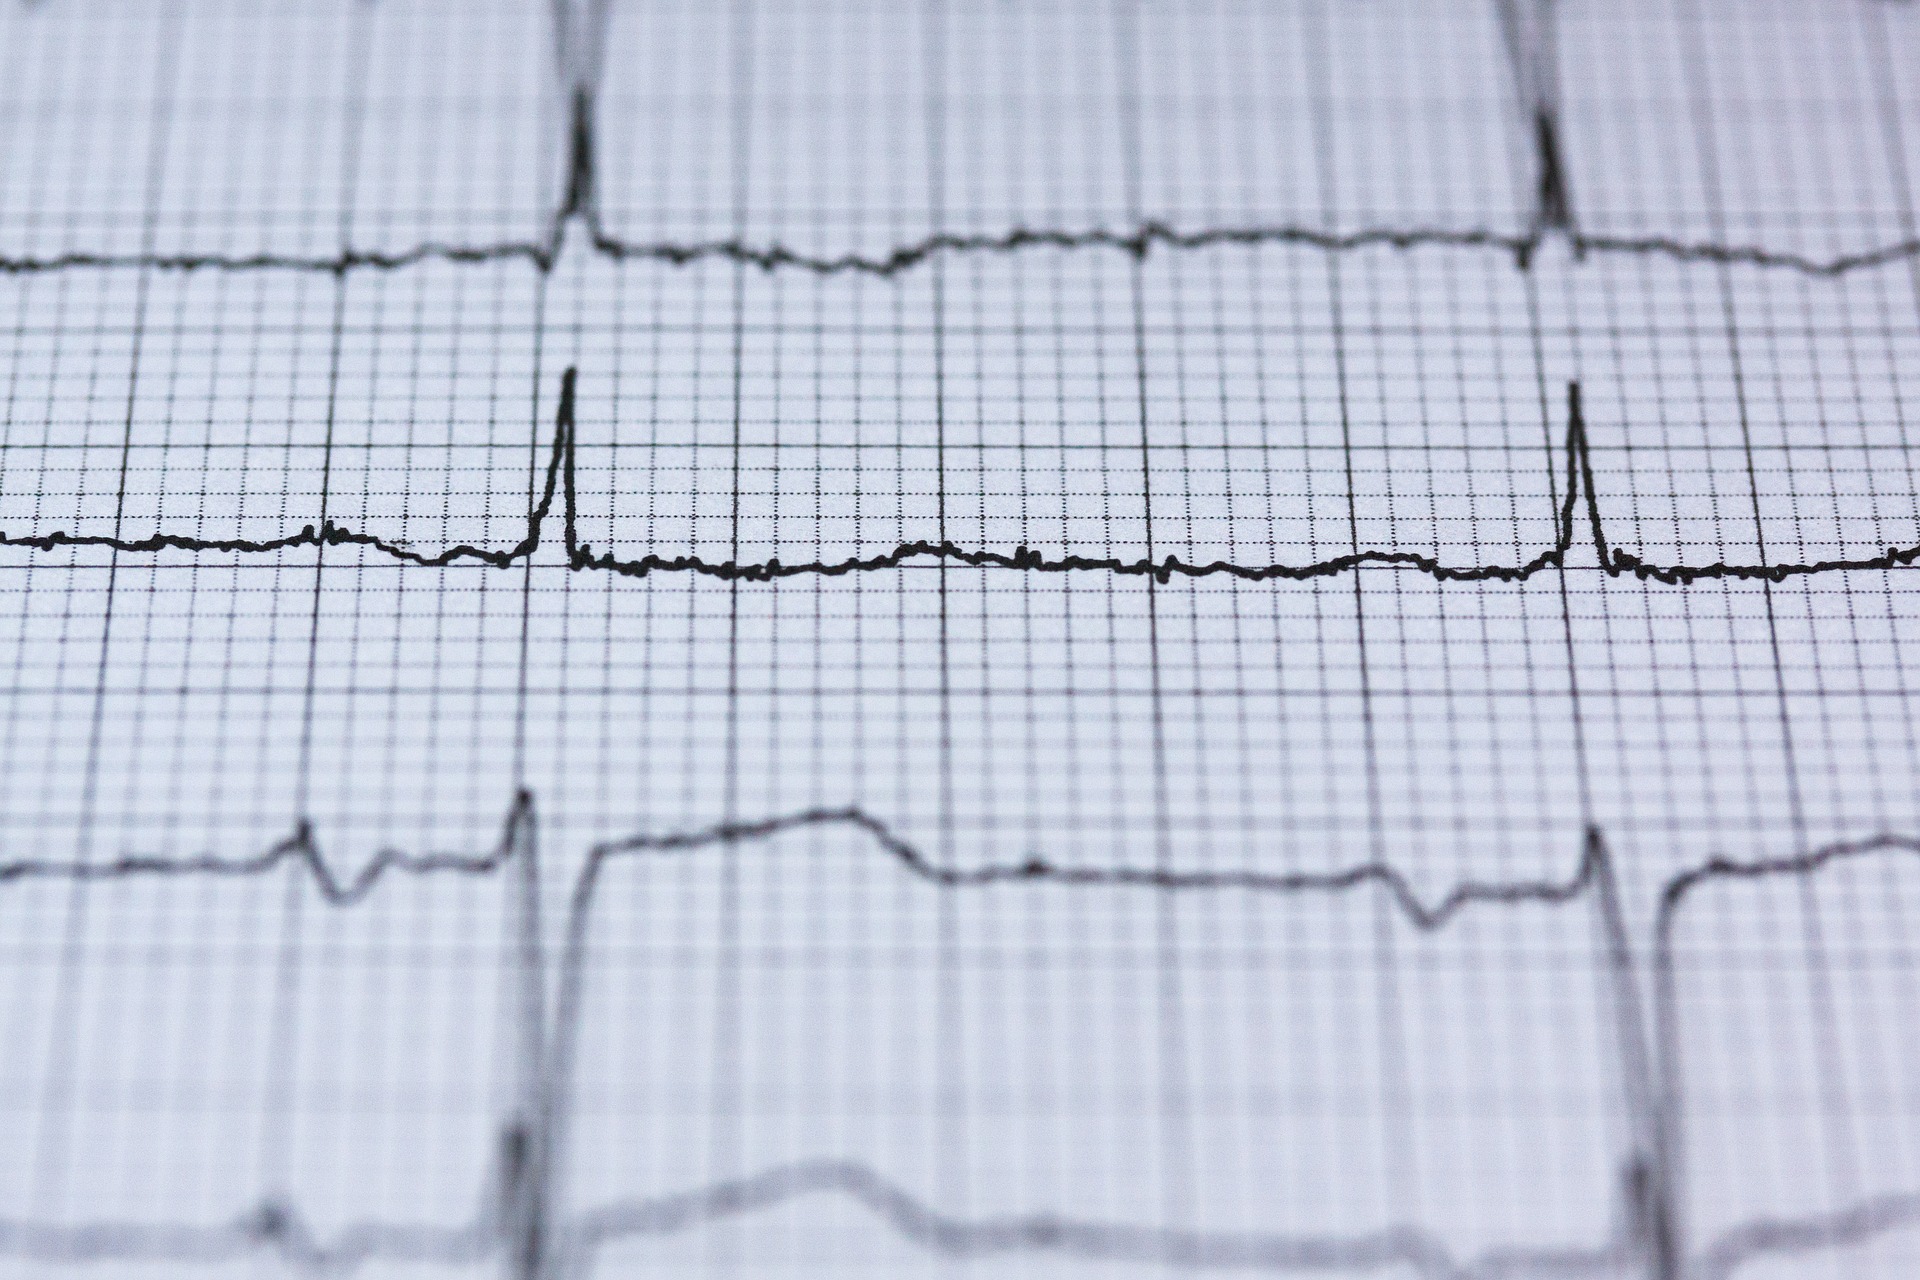 Can heart screening detect possible cardiac arrests? 